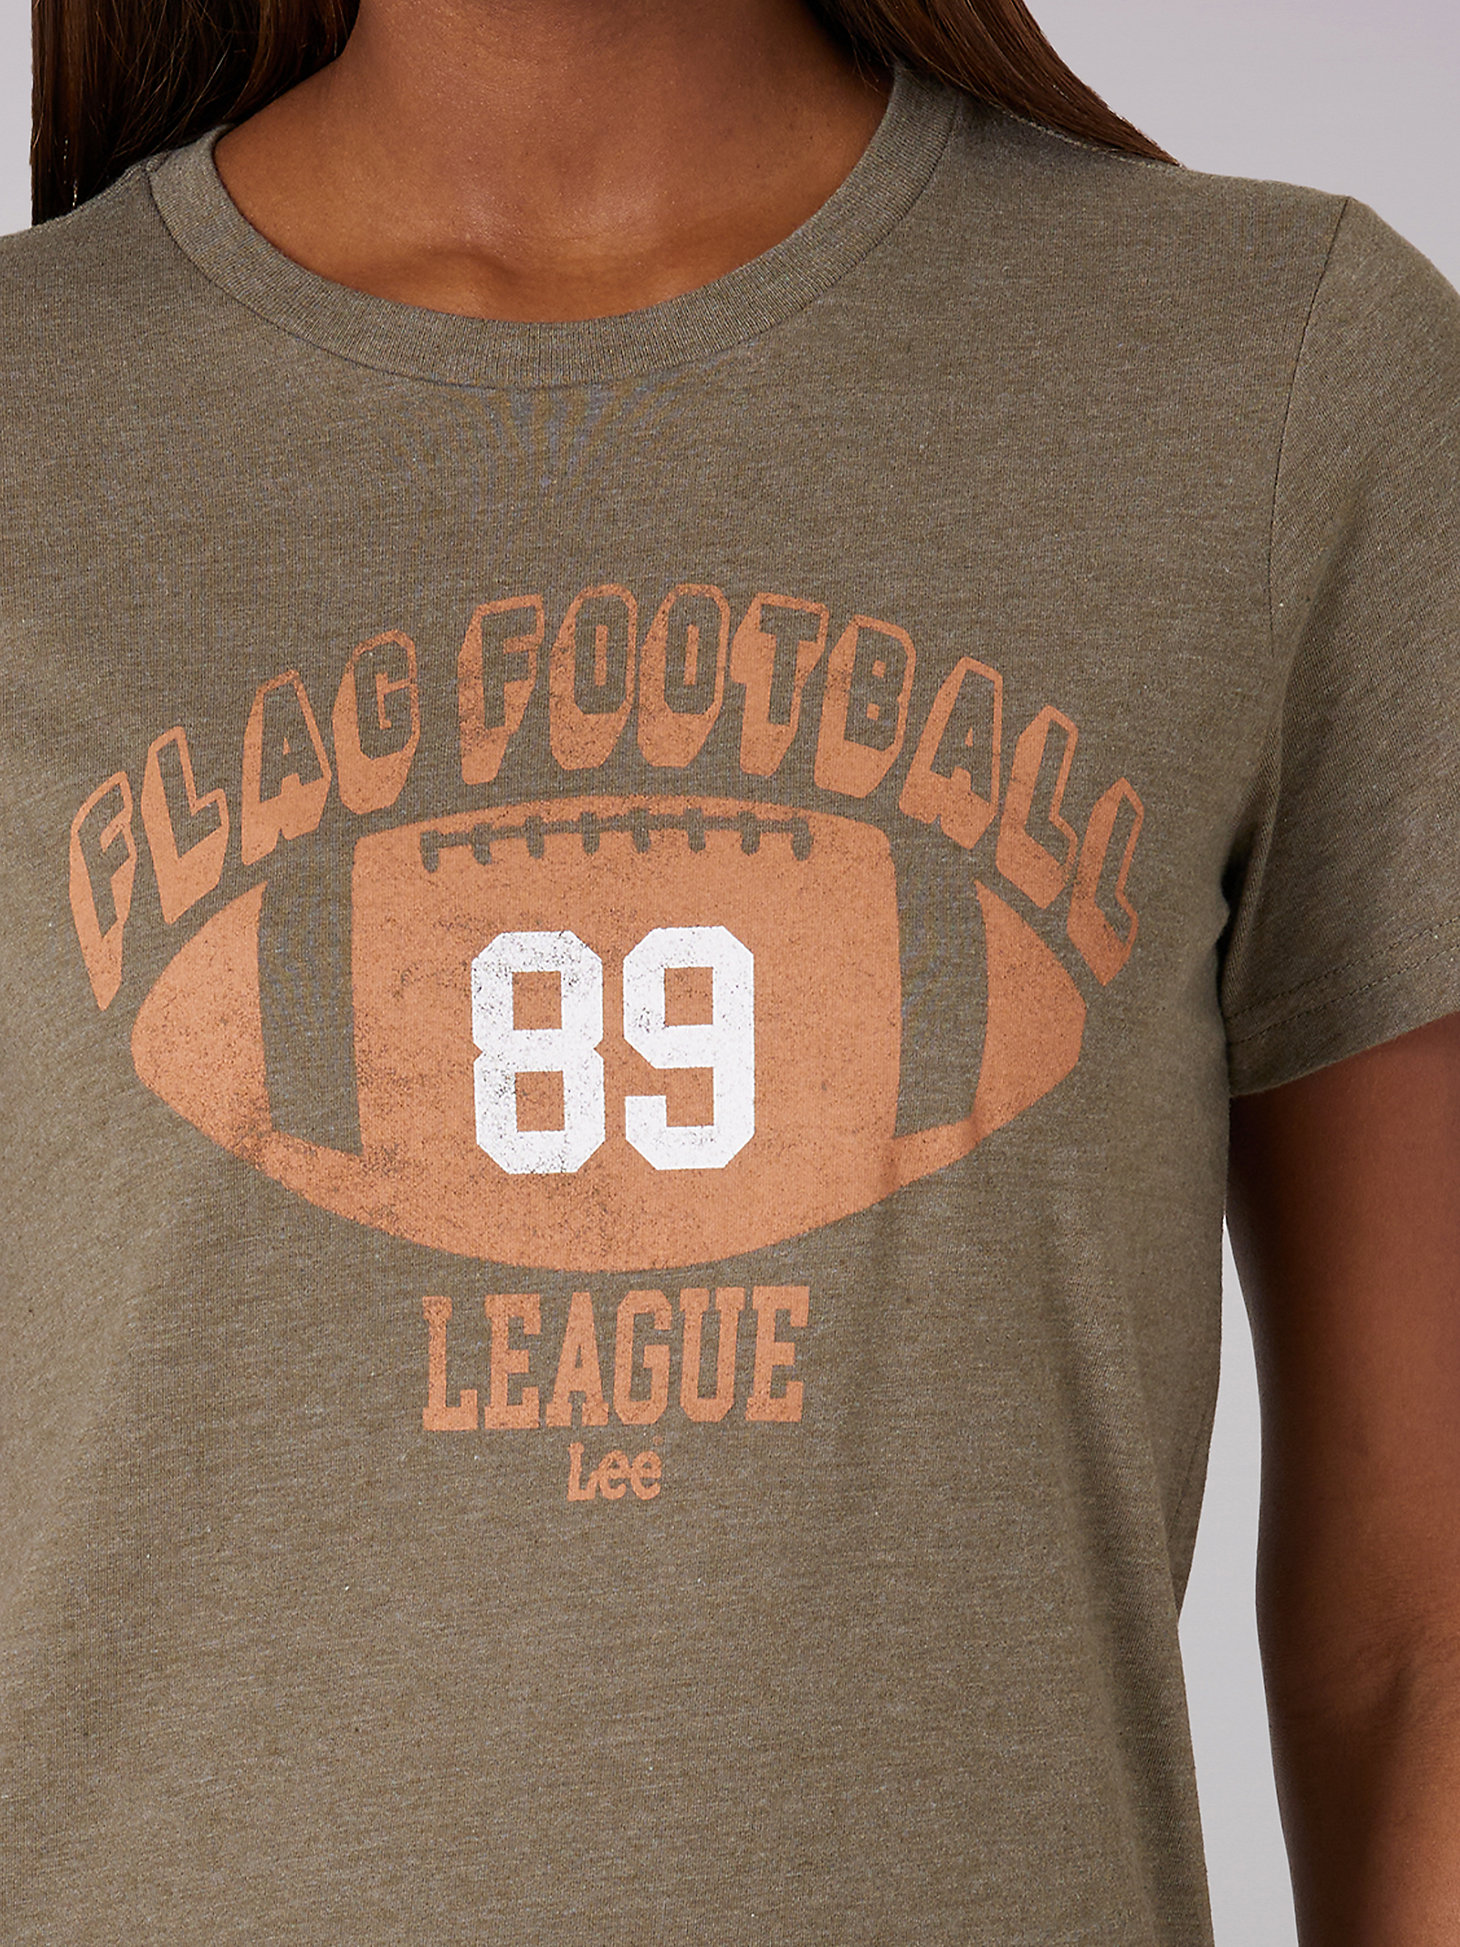 Women's Football Graphic Tee in Burnt Olive Heather alternative view 2